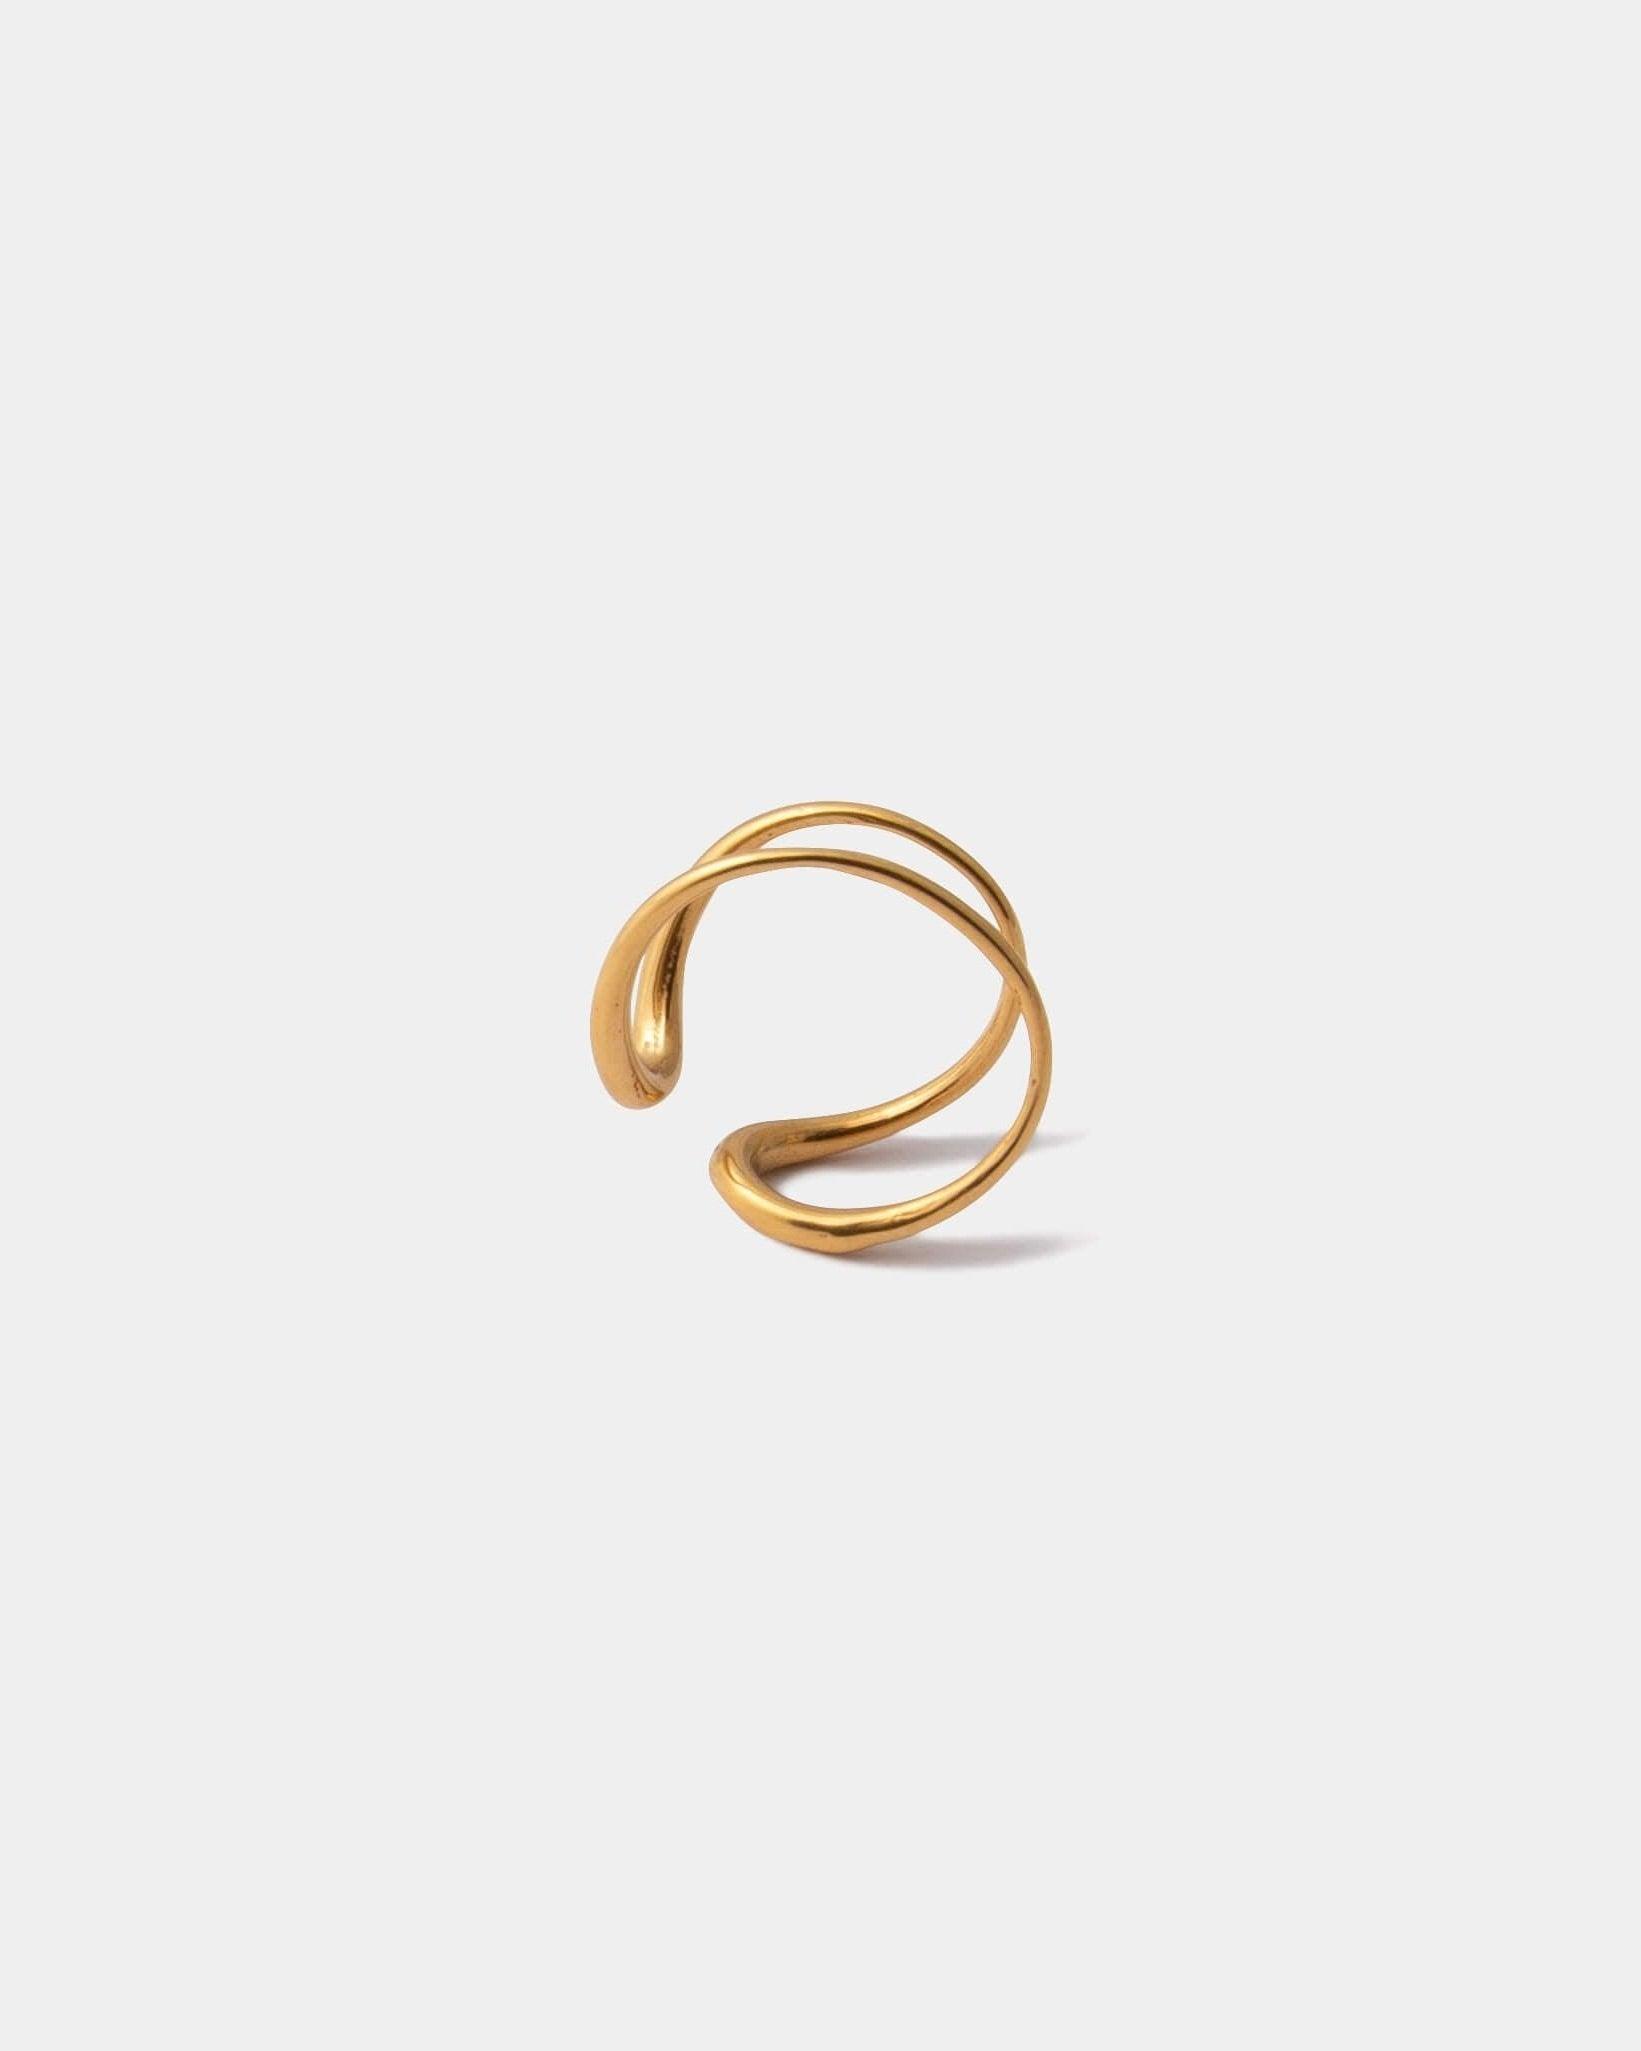 FACET HOOKED EAR CUFF - LIMELY